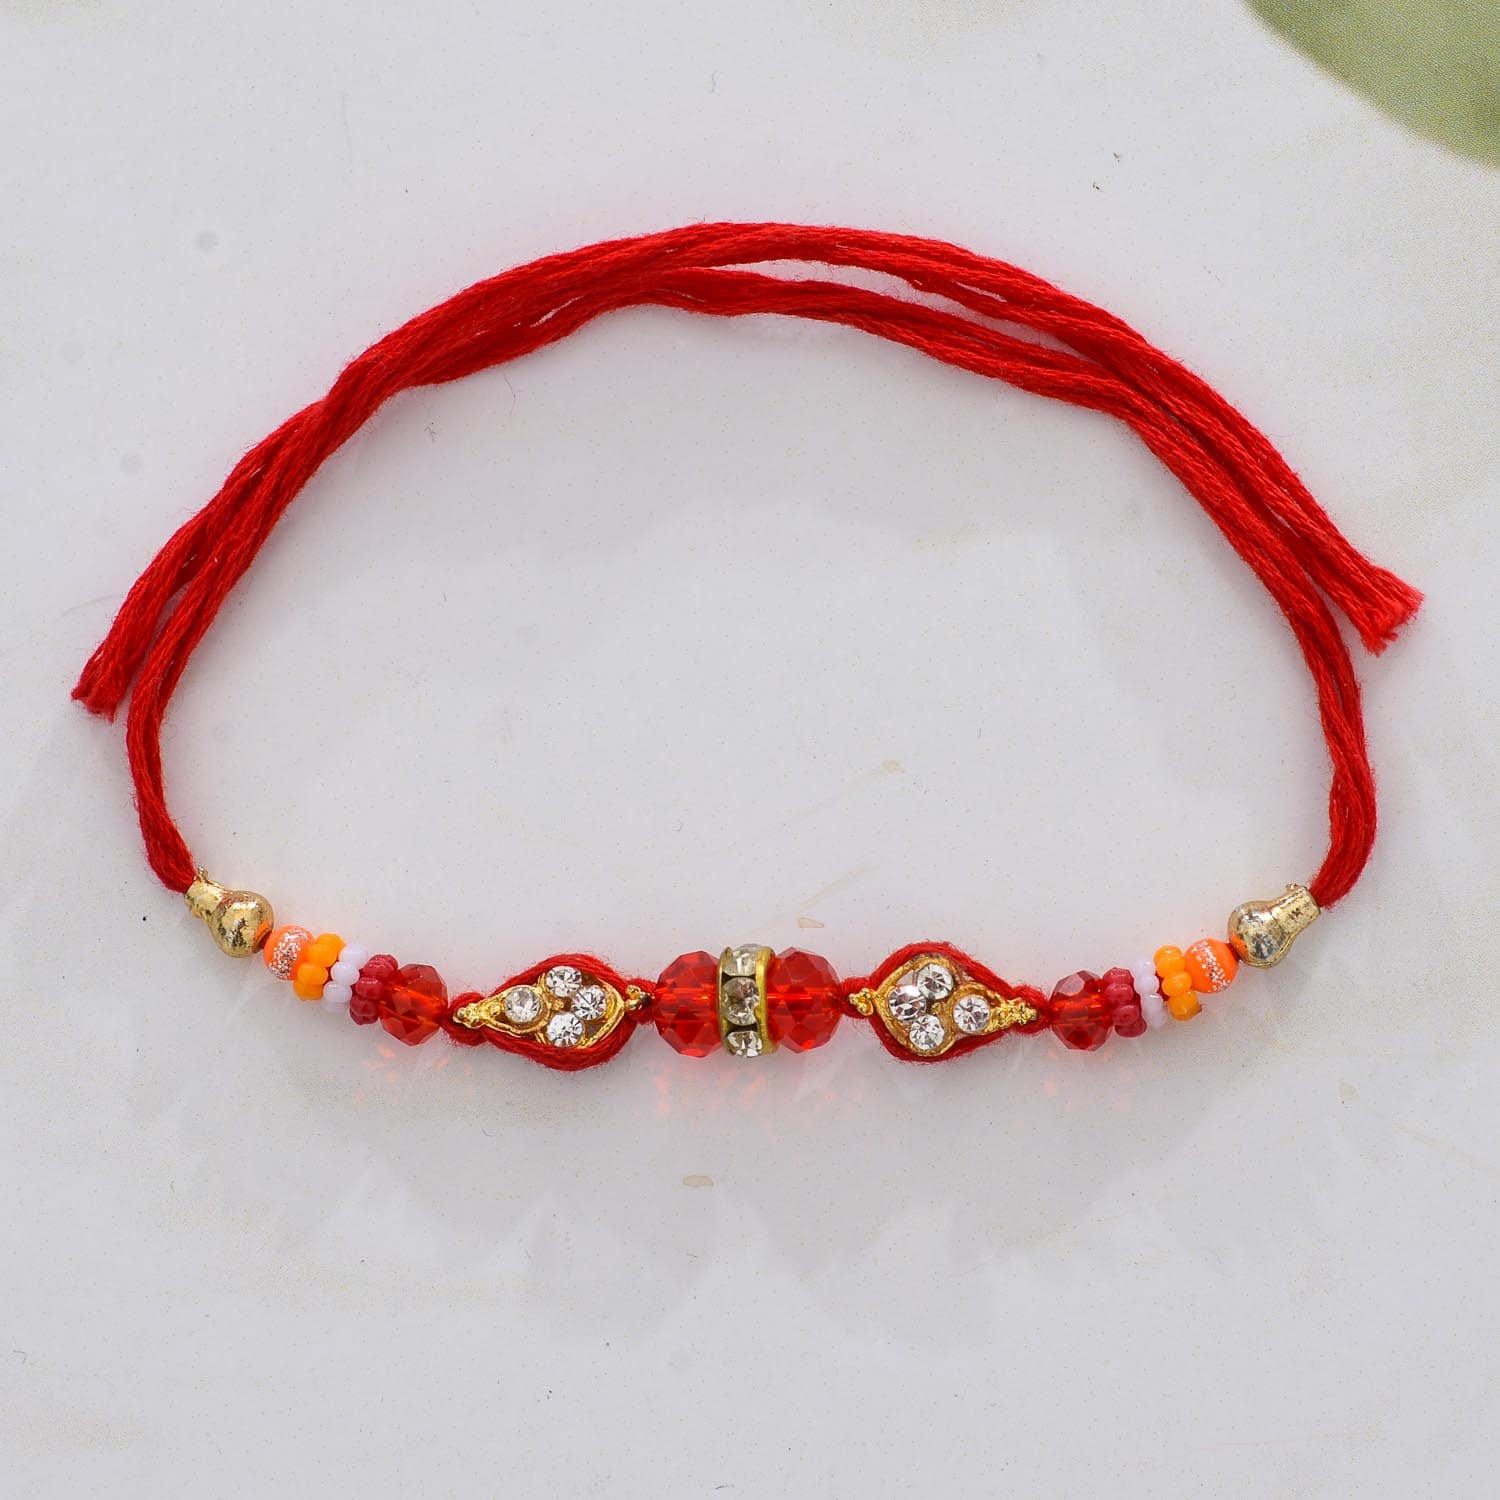 Bright Red Pearl Rakhi  For Brother With Roli Chawal Set